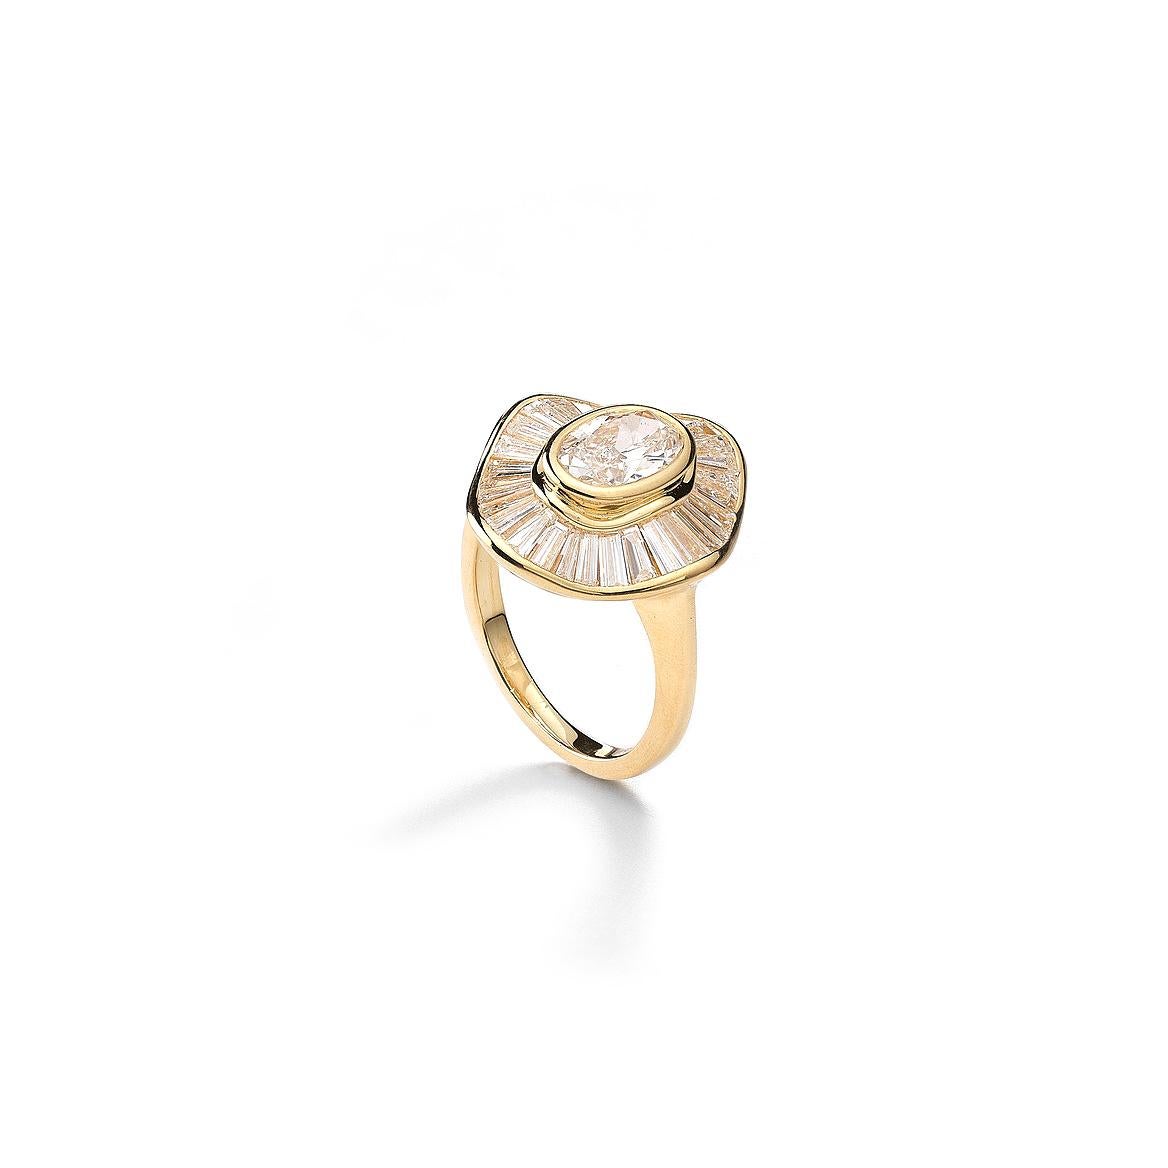 Ring in yellow gold 18kt set with one oval cut diamond 1.25 cts G VS1 and 30 baguette cut diamonds 1.95 cts GIA Certificate Size 53                 